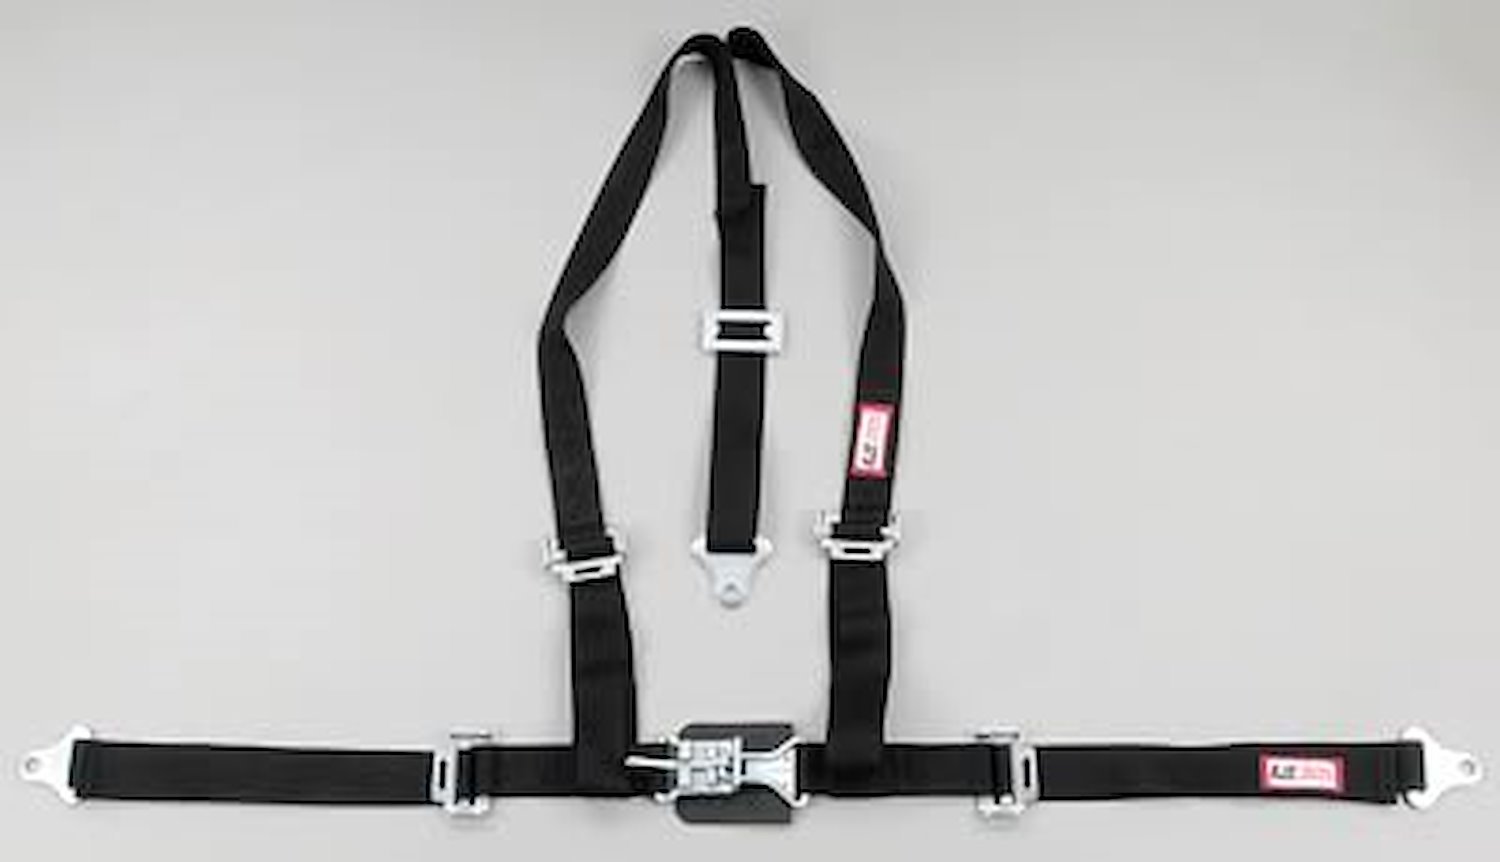 NON-SFI L&L HARNESS 2 PULL UP Lap Belt w/adjuster 2 S.H. V ROLL BAR MOUNT w/STERNUM STRAP ALL WRAP ENDS RED